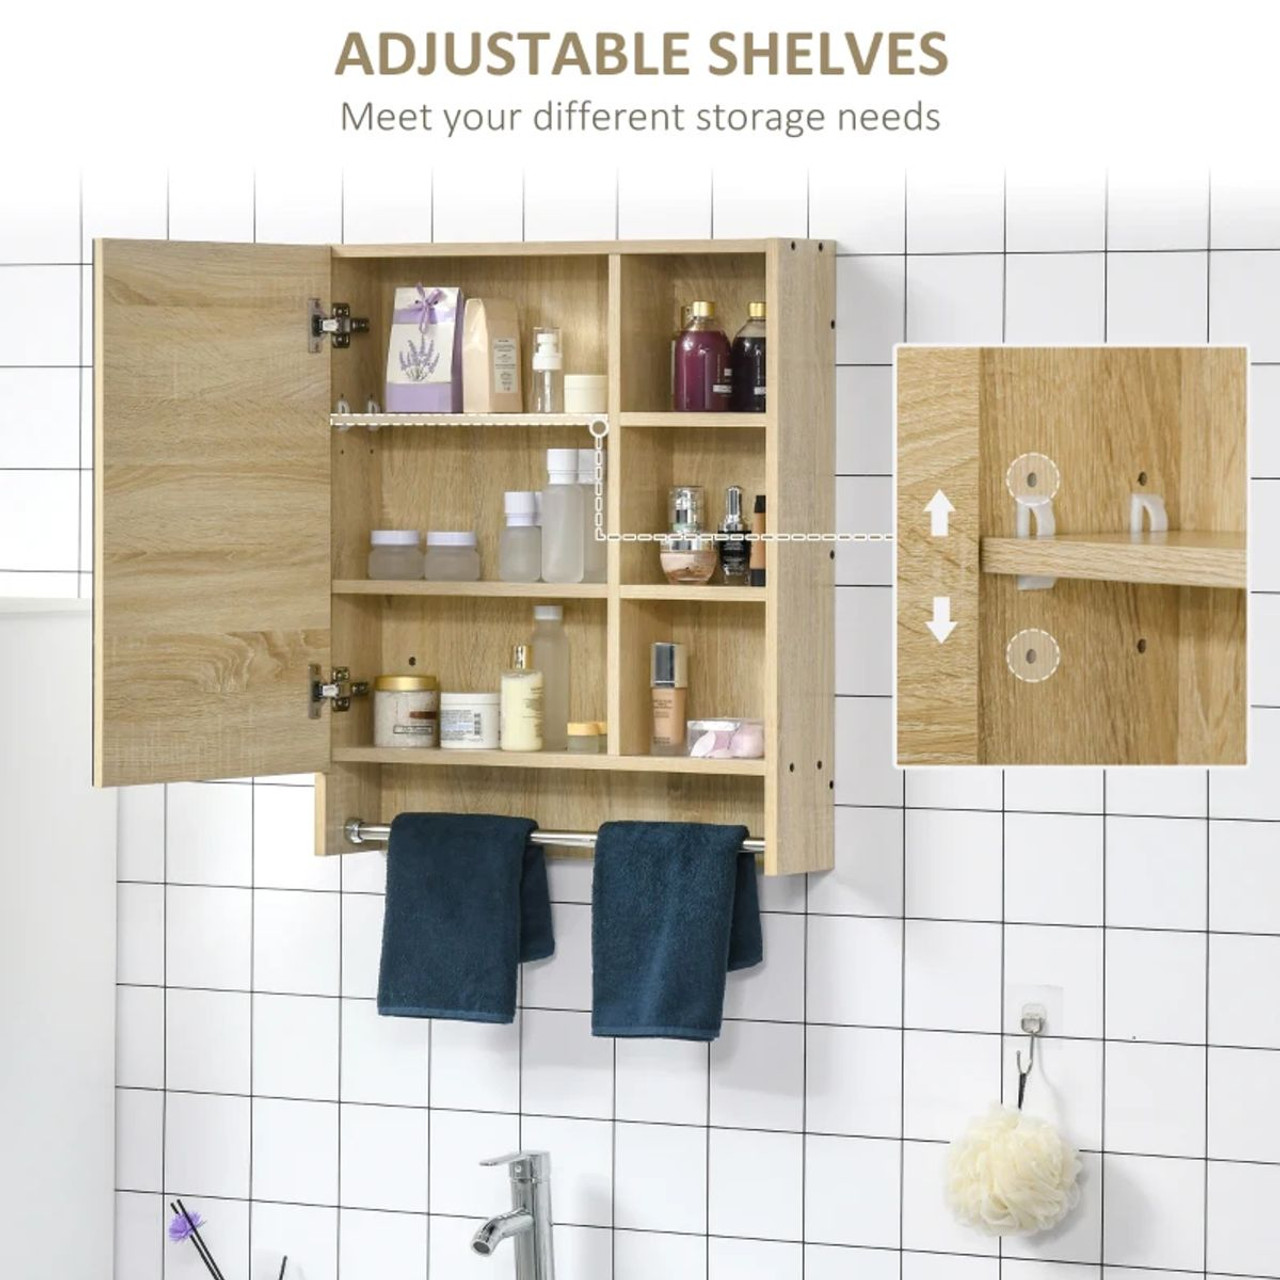 Wall-Mounted Bathroom Mirror Medicine Cabinet with Shelves & Towel Rack product image